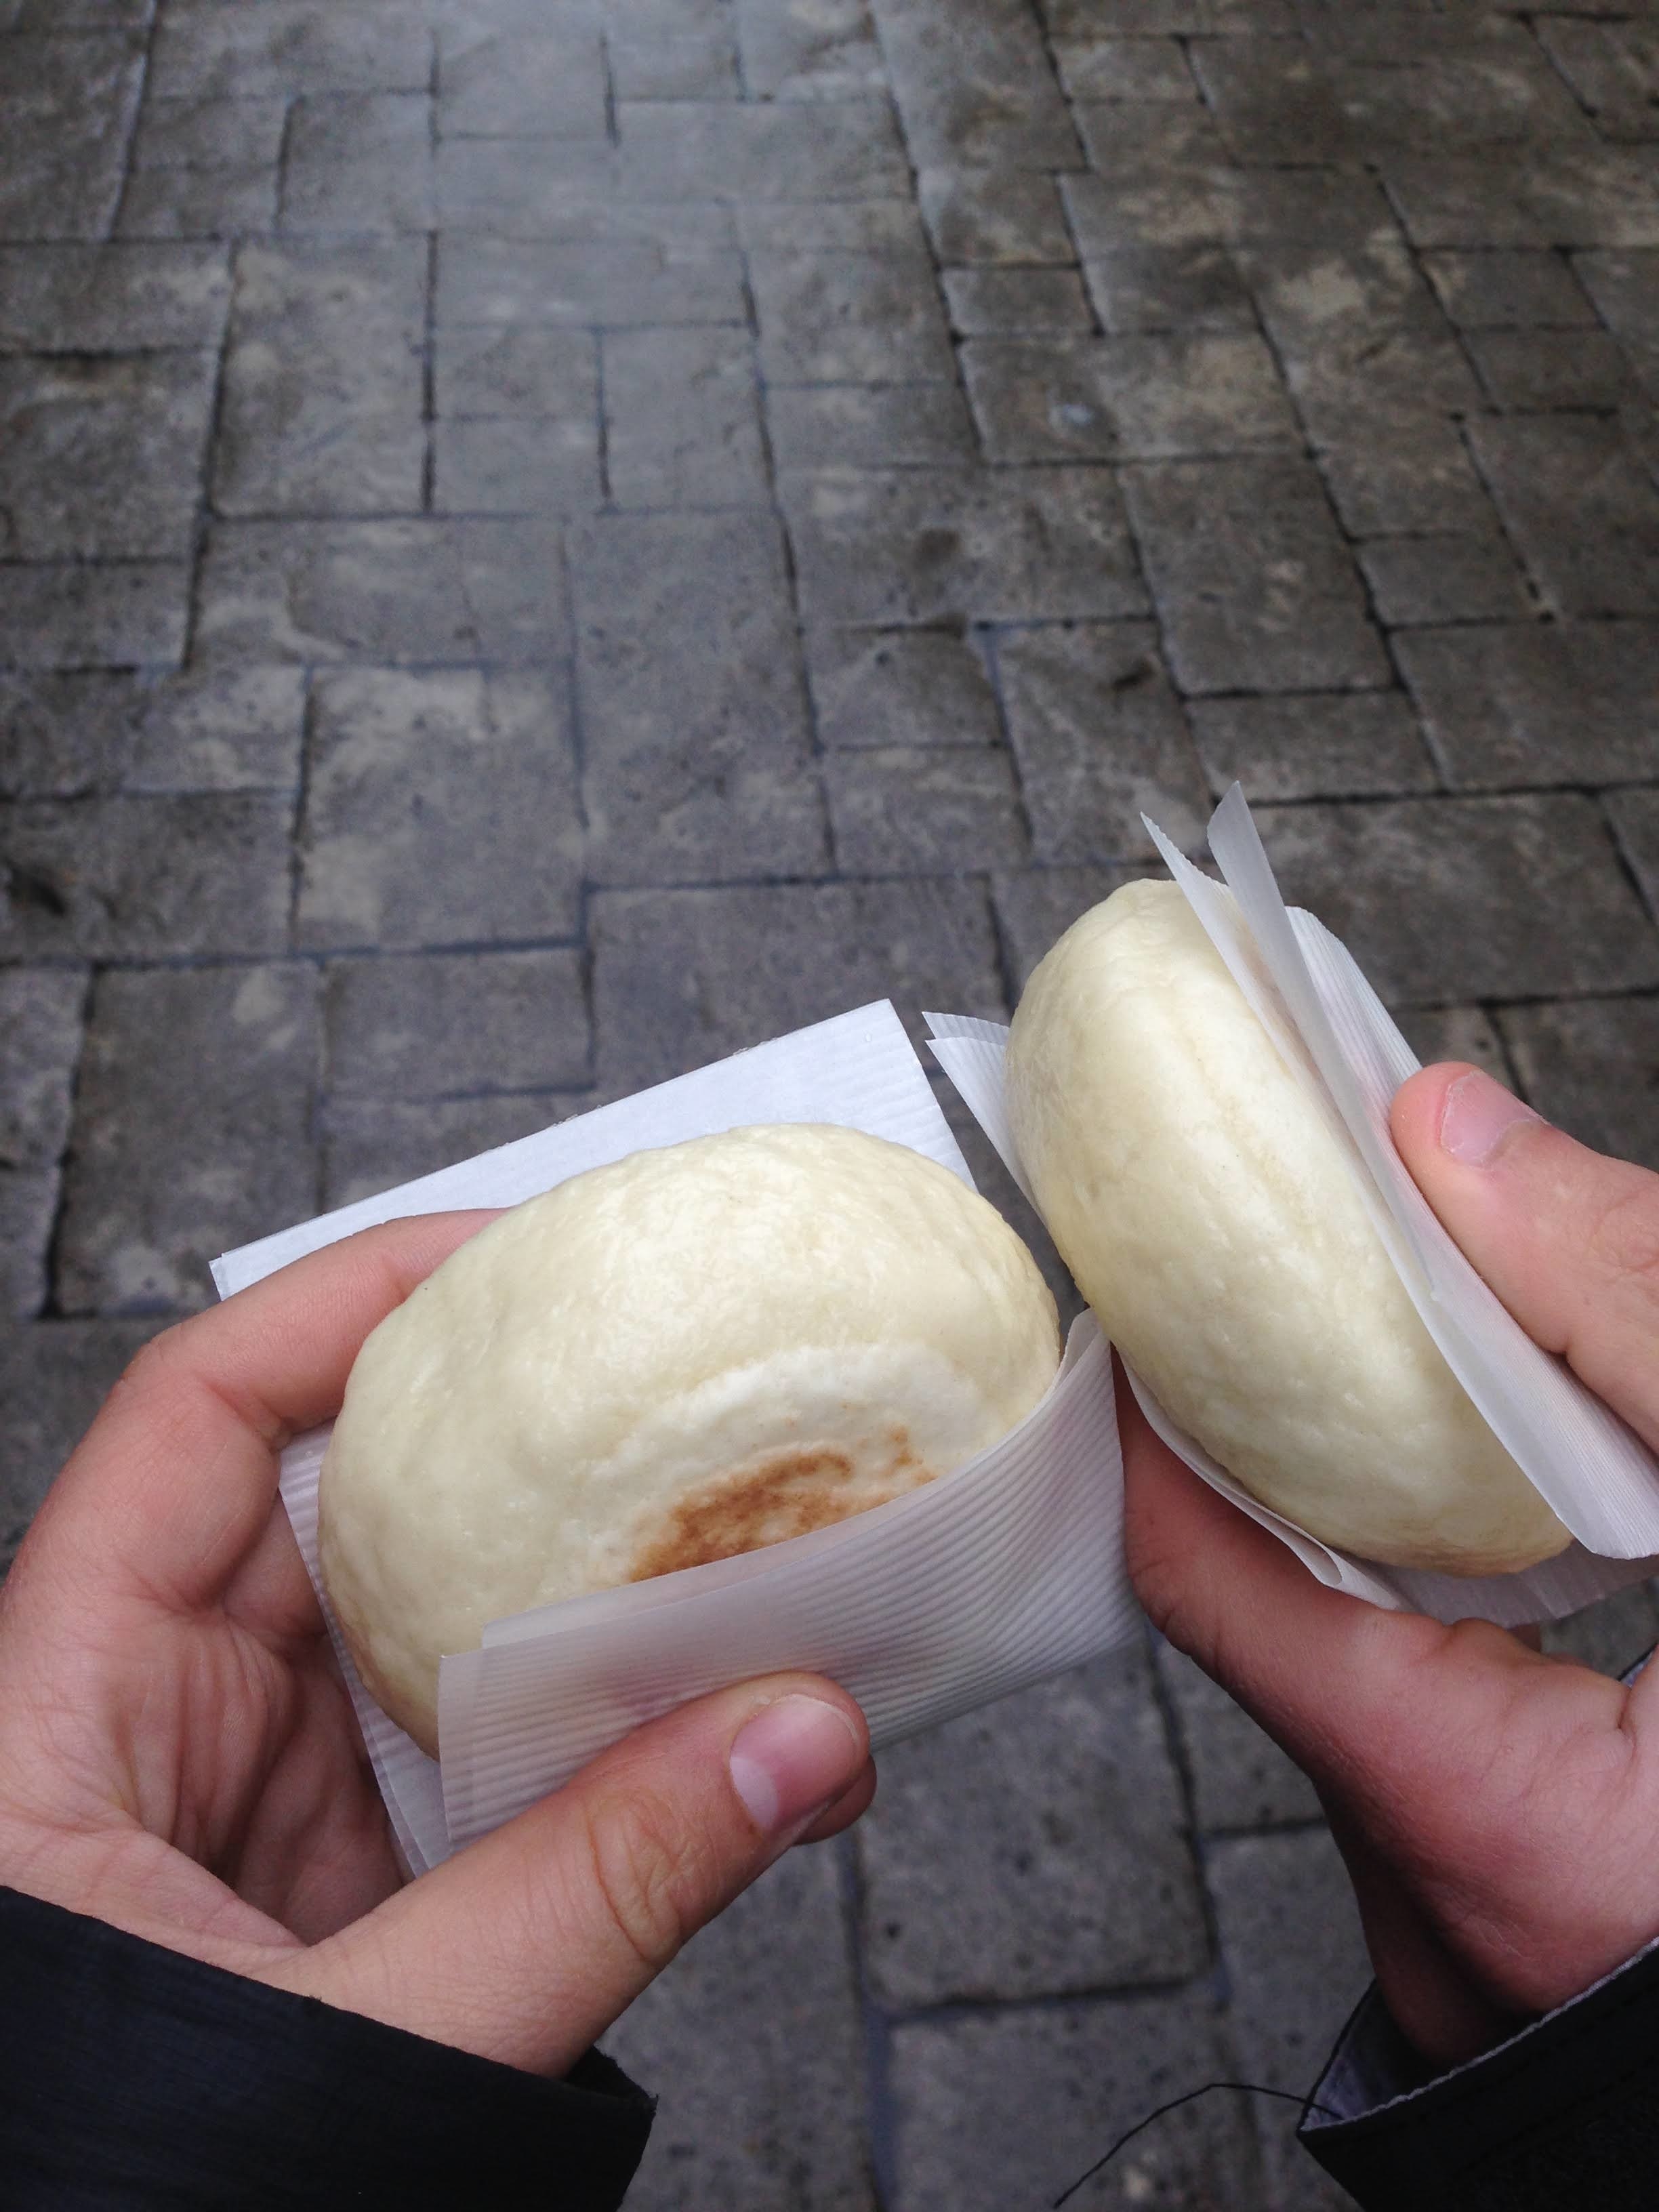 Hot buns about to be eaten on the street